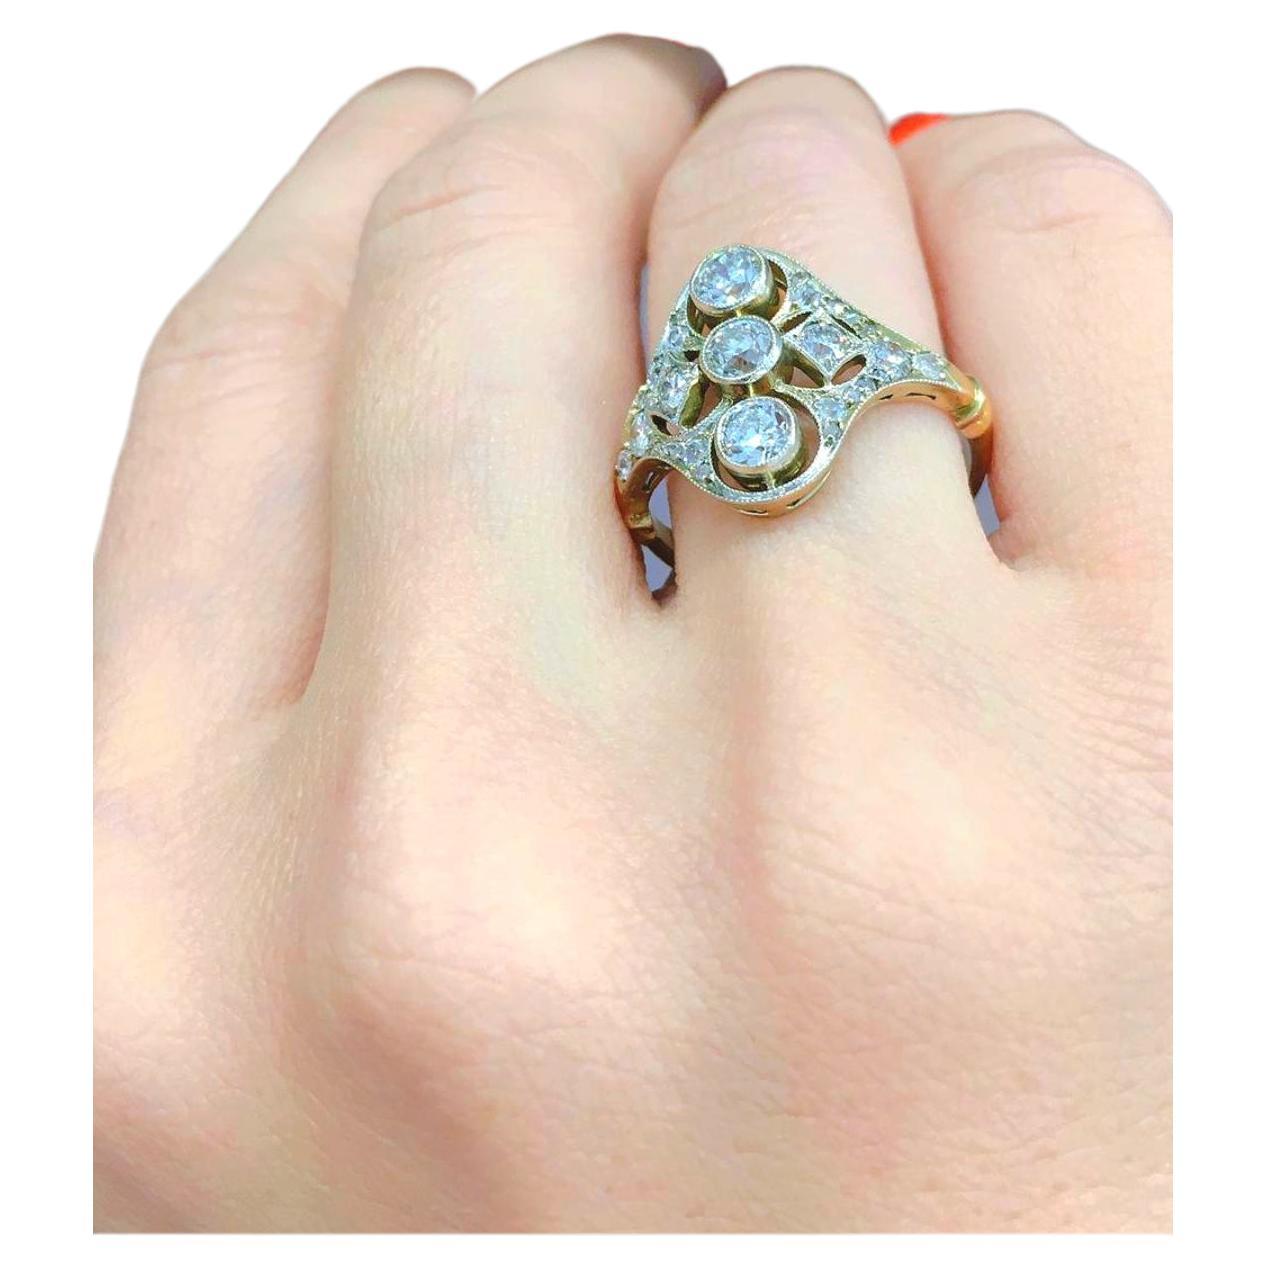 Antique 14k gold ring in geometric open work style centered with 3 large old mine cut diamonds flanked with smaller old mine cut diamonds with total estimate weight of 1.5 carats H/i color inclousions included 